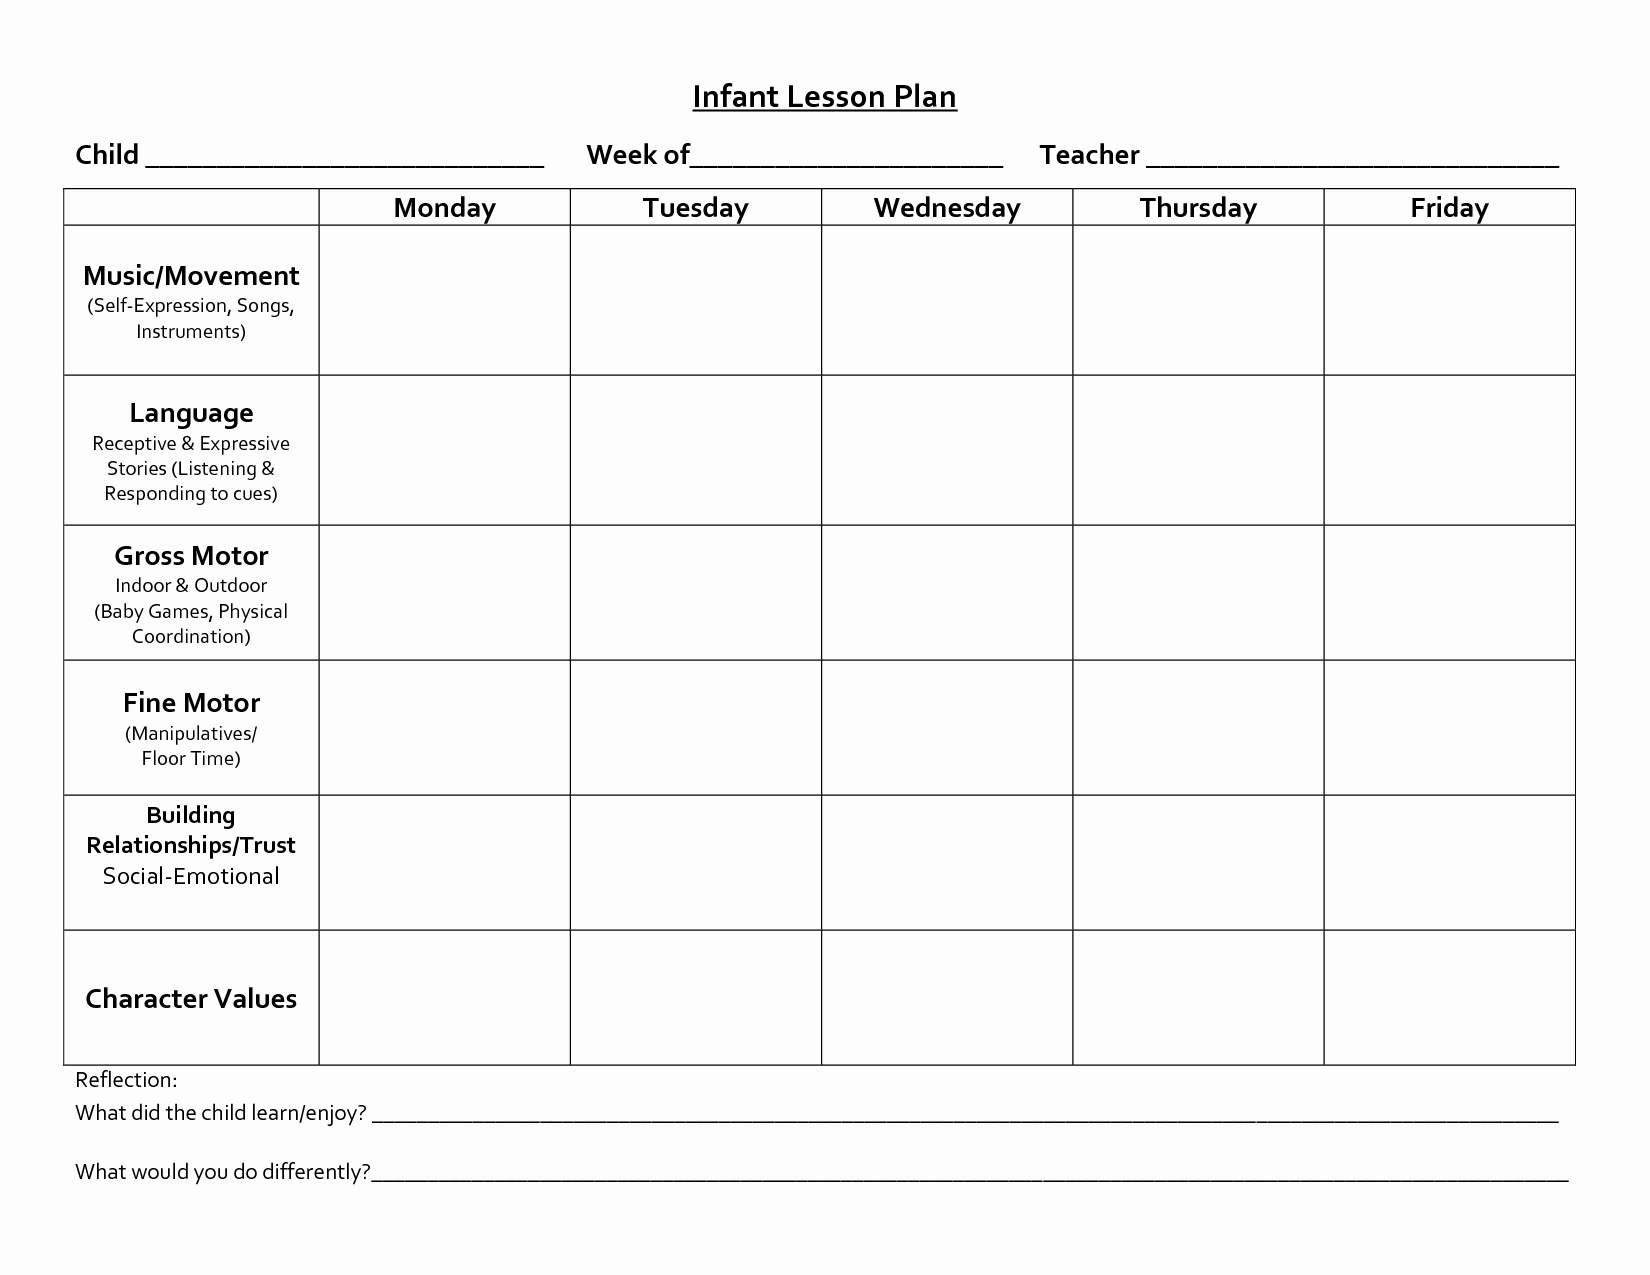 Blank Lesson Plan Template Free Awesome Infant Blank Lesson Plan Sheets